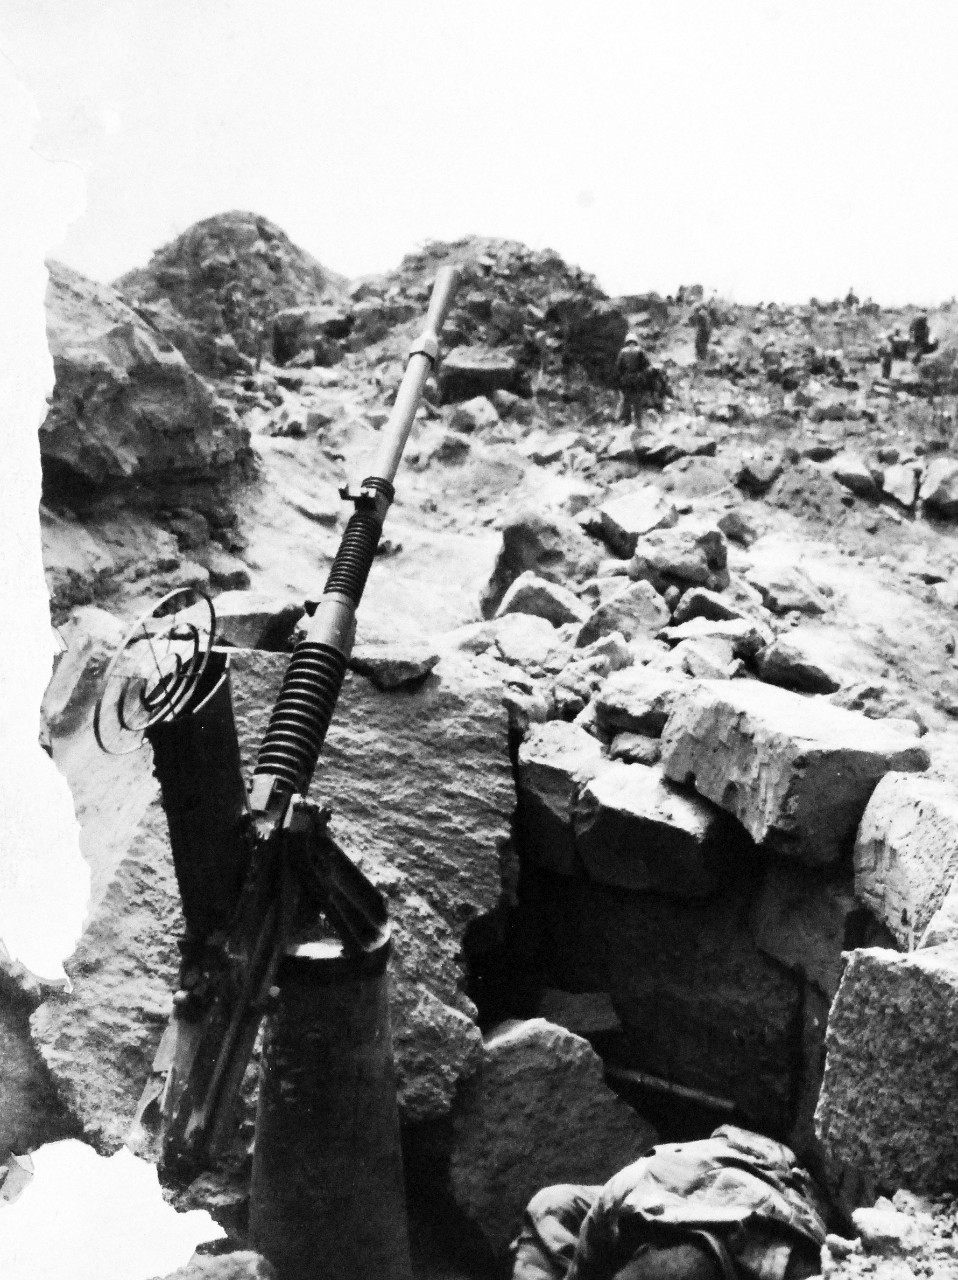 127-GW-304-143339:  Battle for Iwo Jima, February-March 1945.   Japanese Single-mount 13mm MG on pedestal mount in emplacement Photographed by Ragus, March 1945.  Official U.S. Marine Corps photograph, now in the collections of the National Archives.  (2016/02/17).